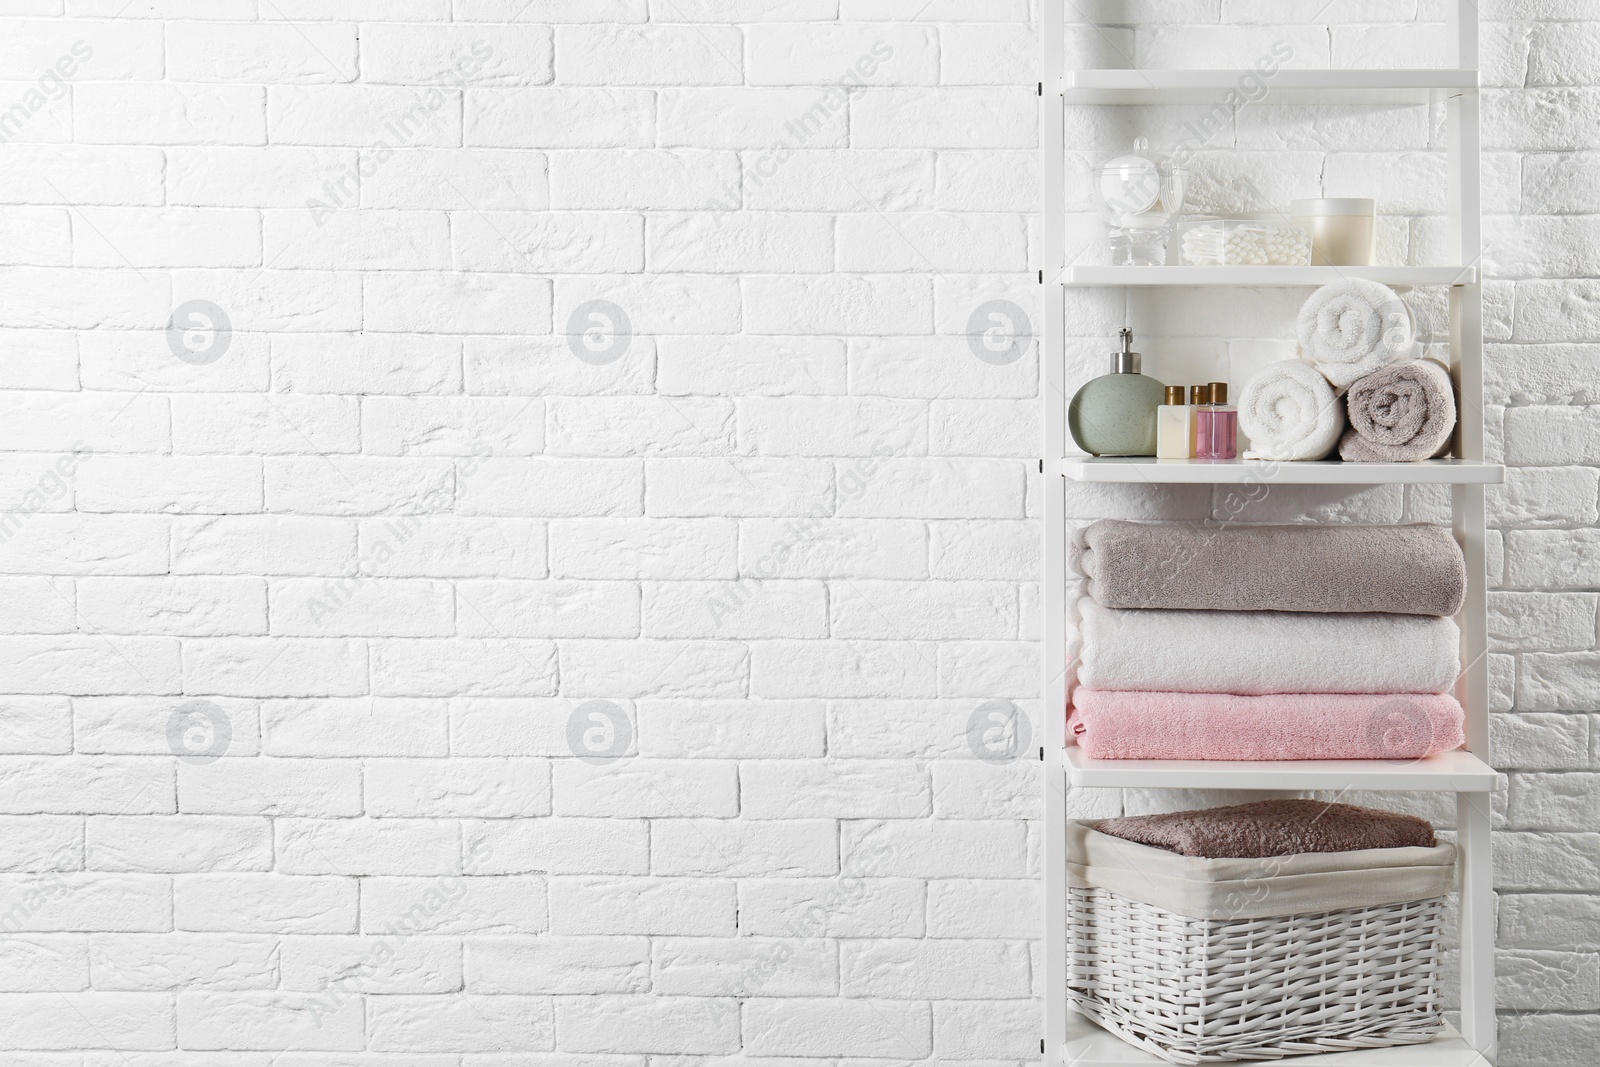 Photo of Shelving unit with clean towels and toiletries near brick wall. Space for text